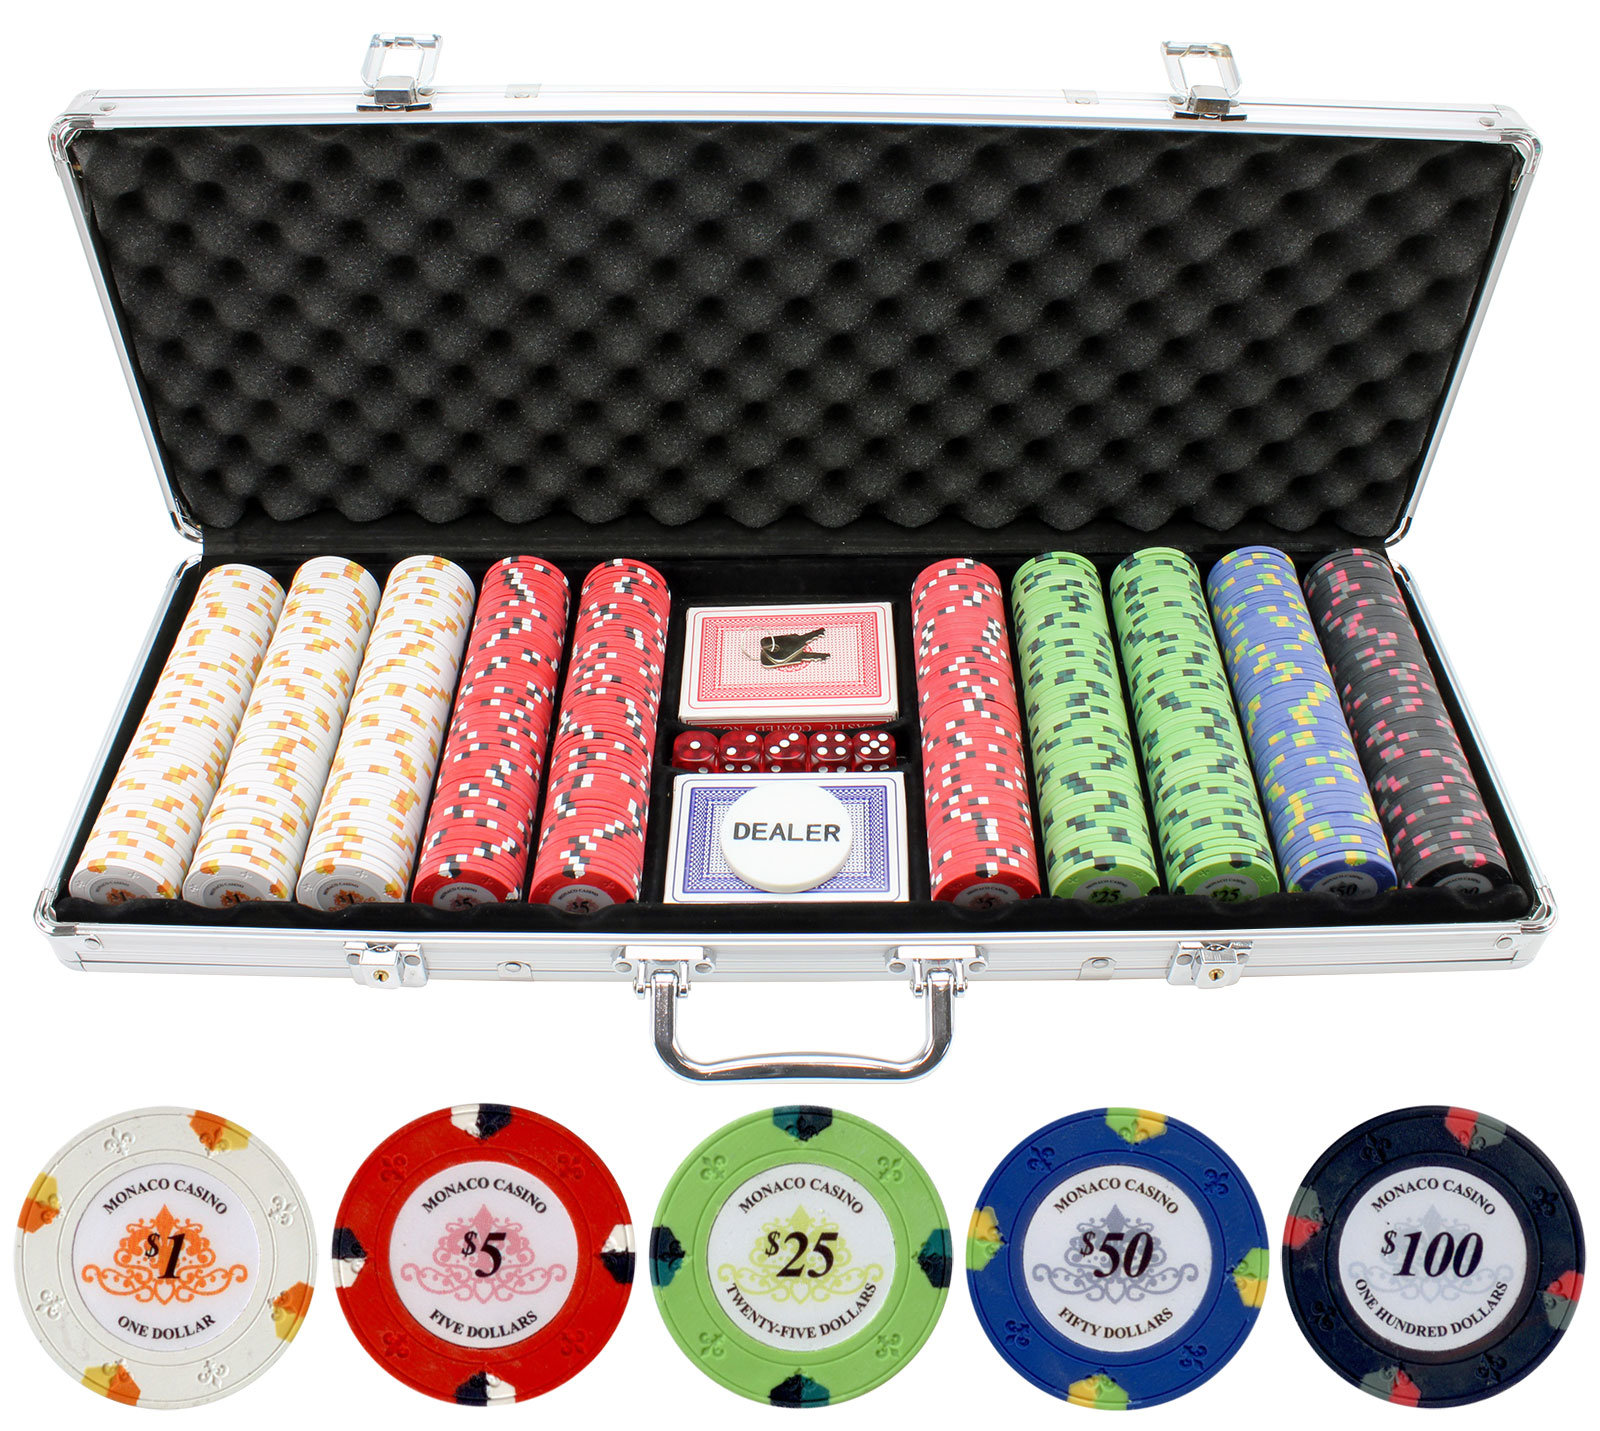 50pcs Ultimate Casino Laser Clay Poker Chips $1000 